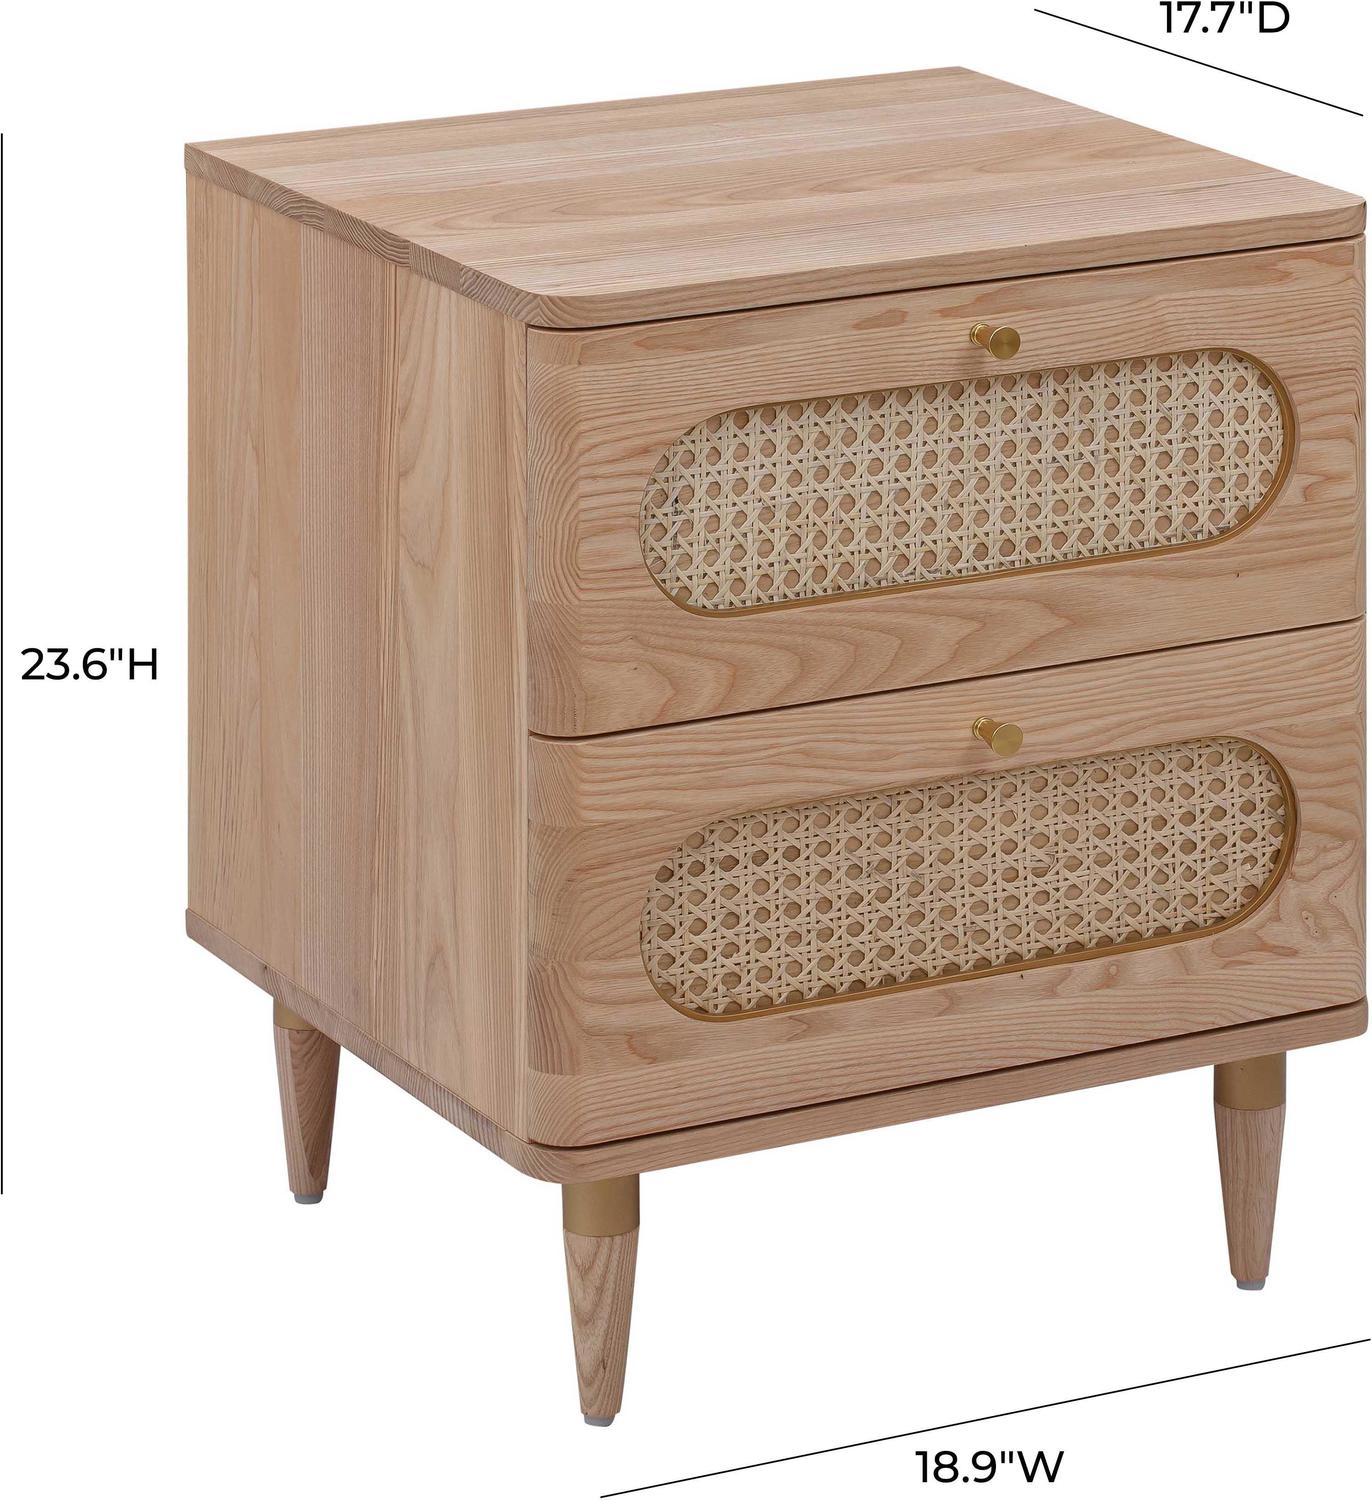 one nightstand Contemporary Design Furniture Nightstands Night Stands Natural